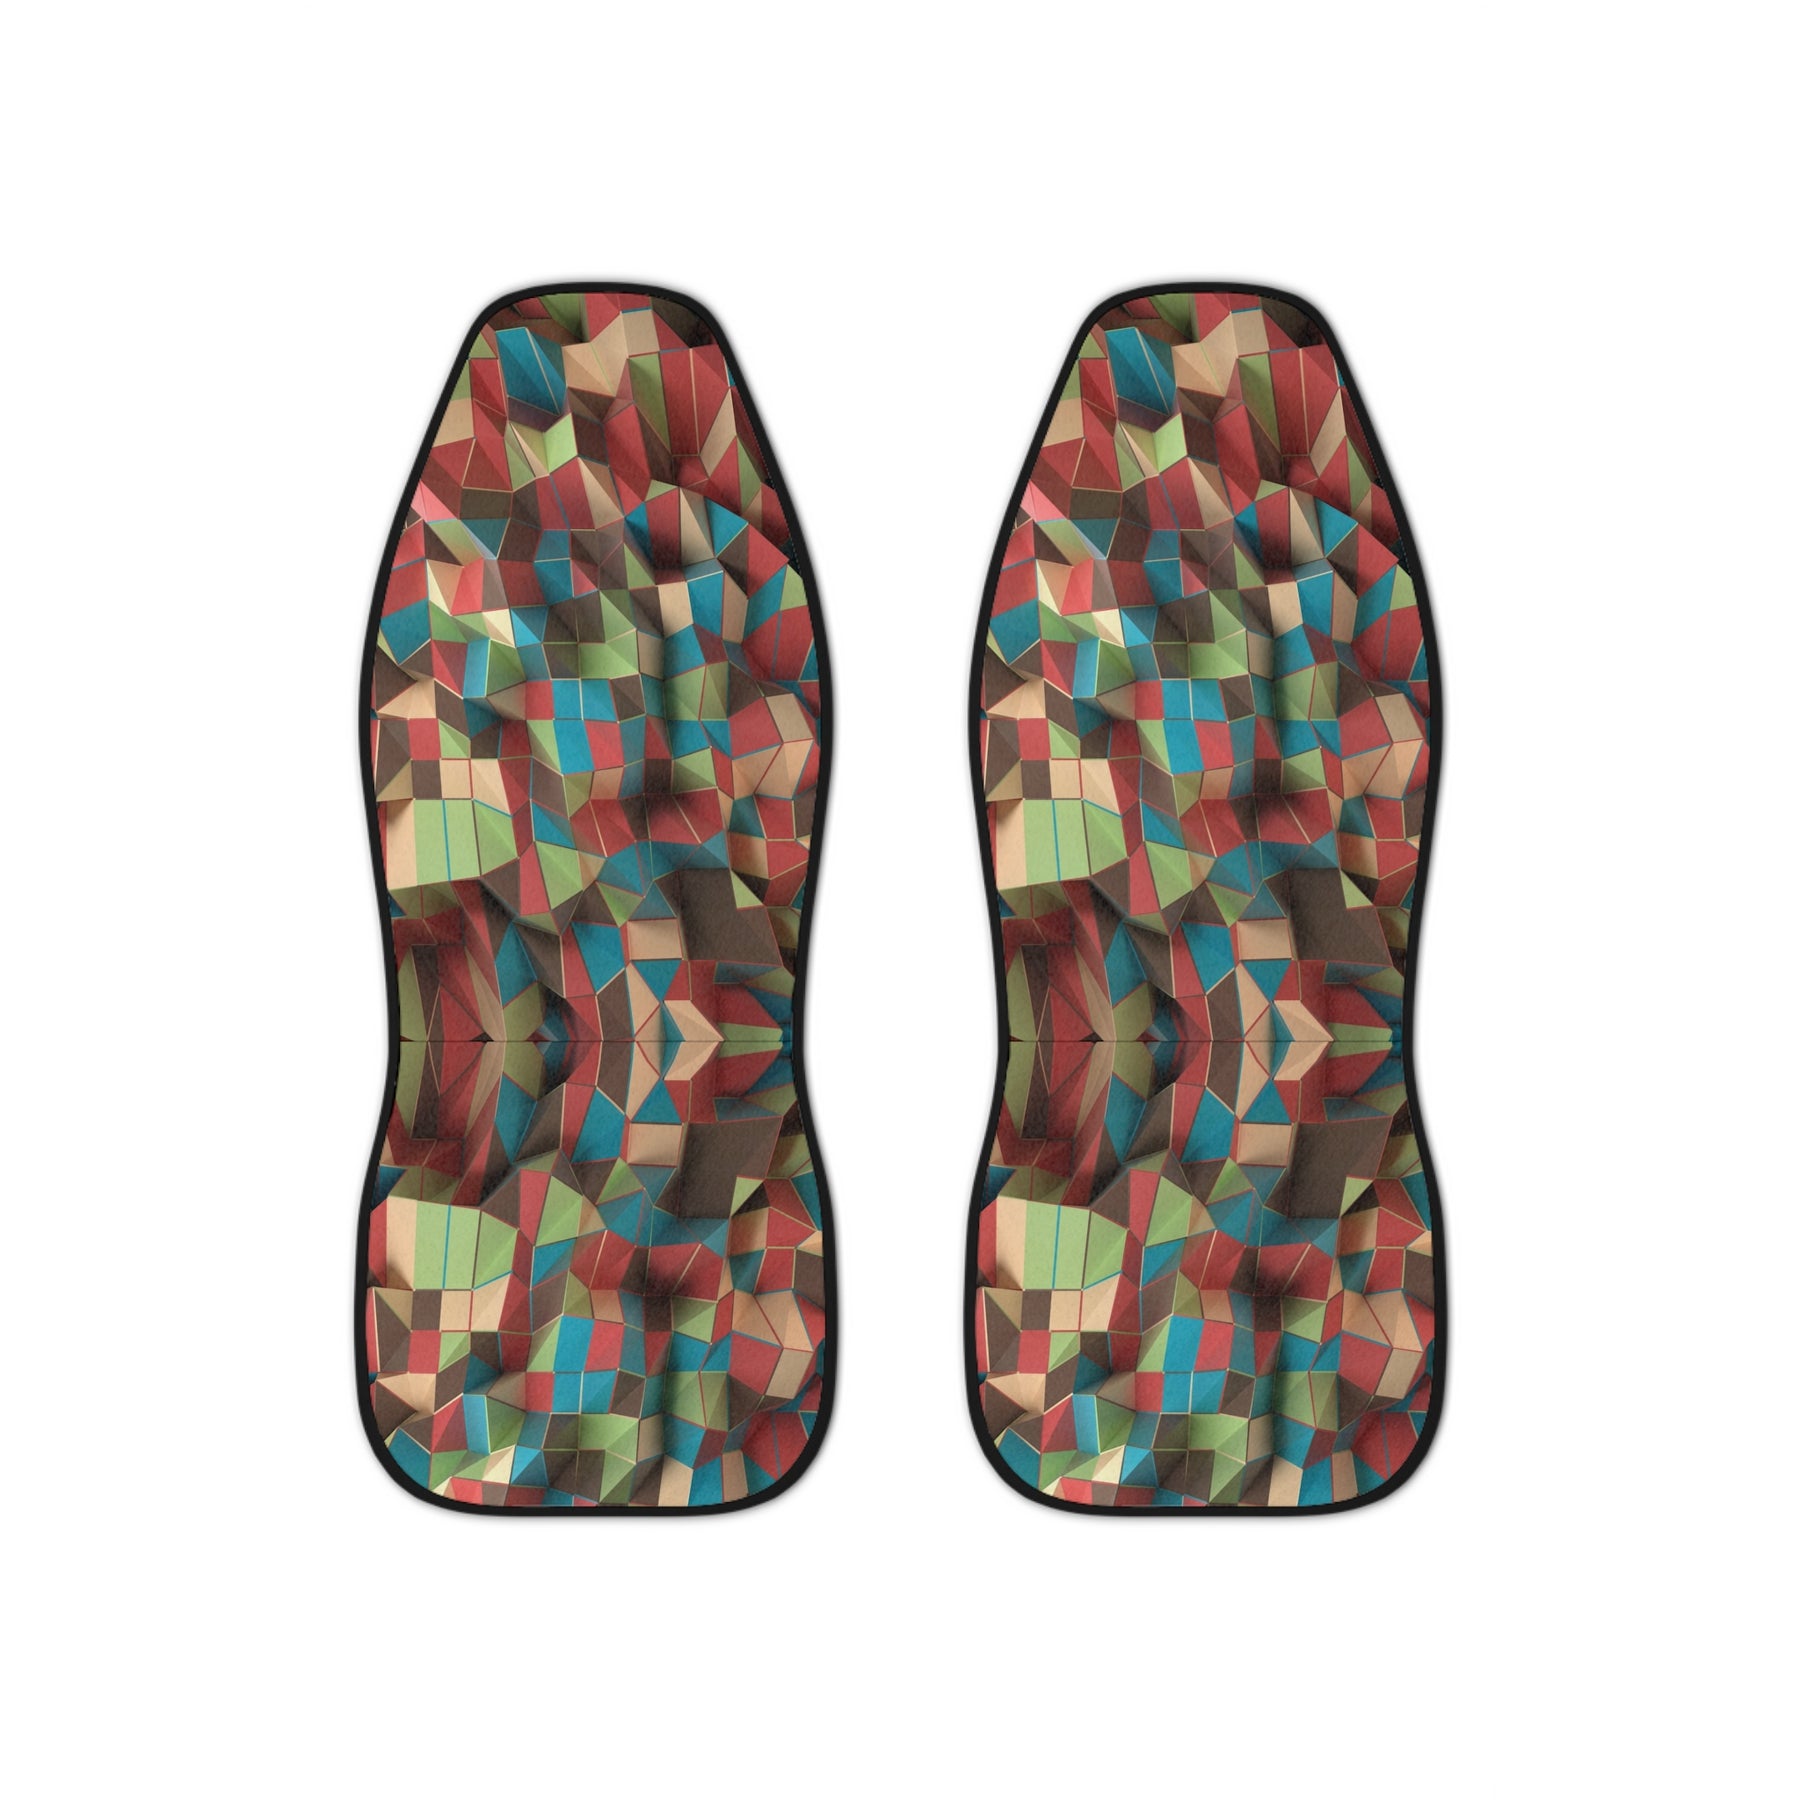 3D Abstract Art Car Seat Covers Set,Modern Artistic Car Seat Cover, Cool Groovy car Accessories,Retro car decorations